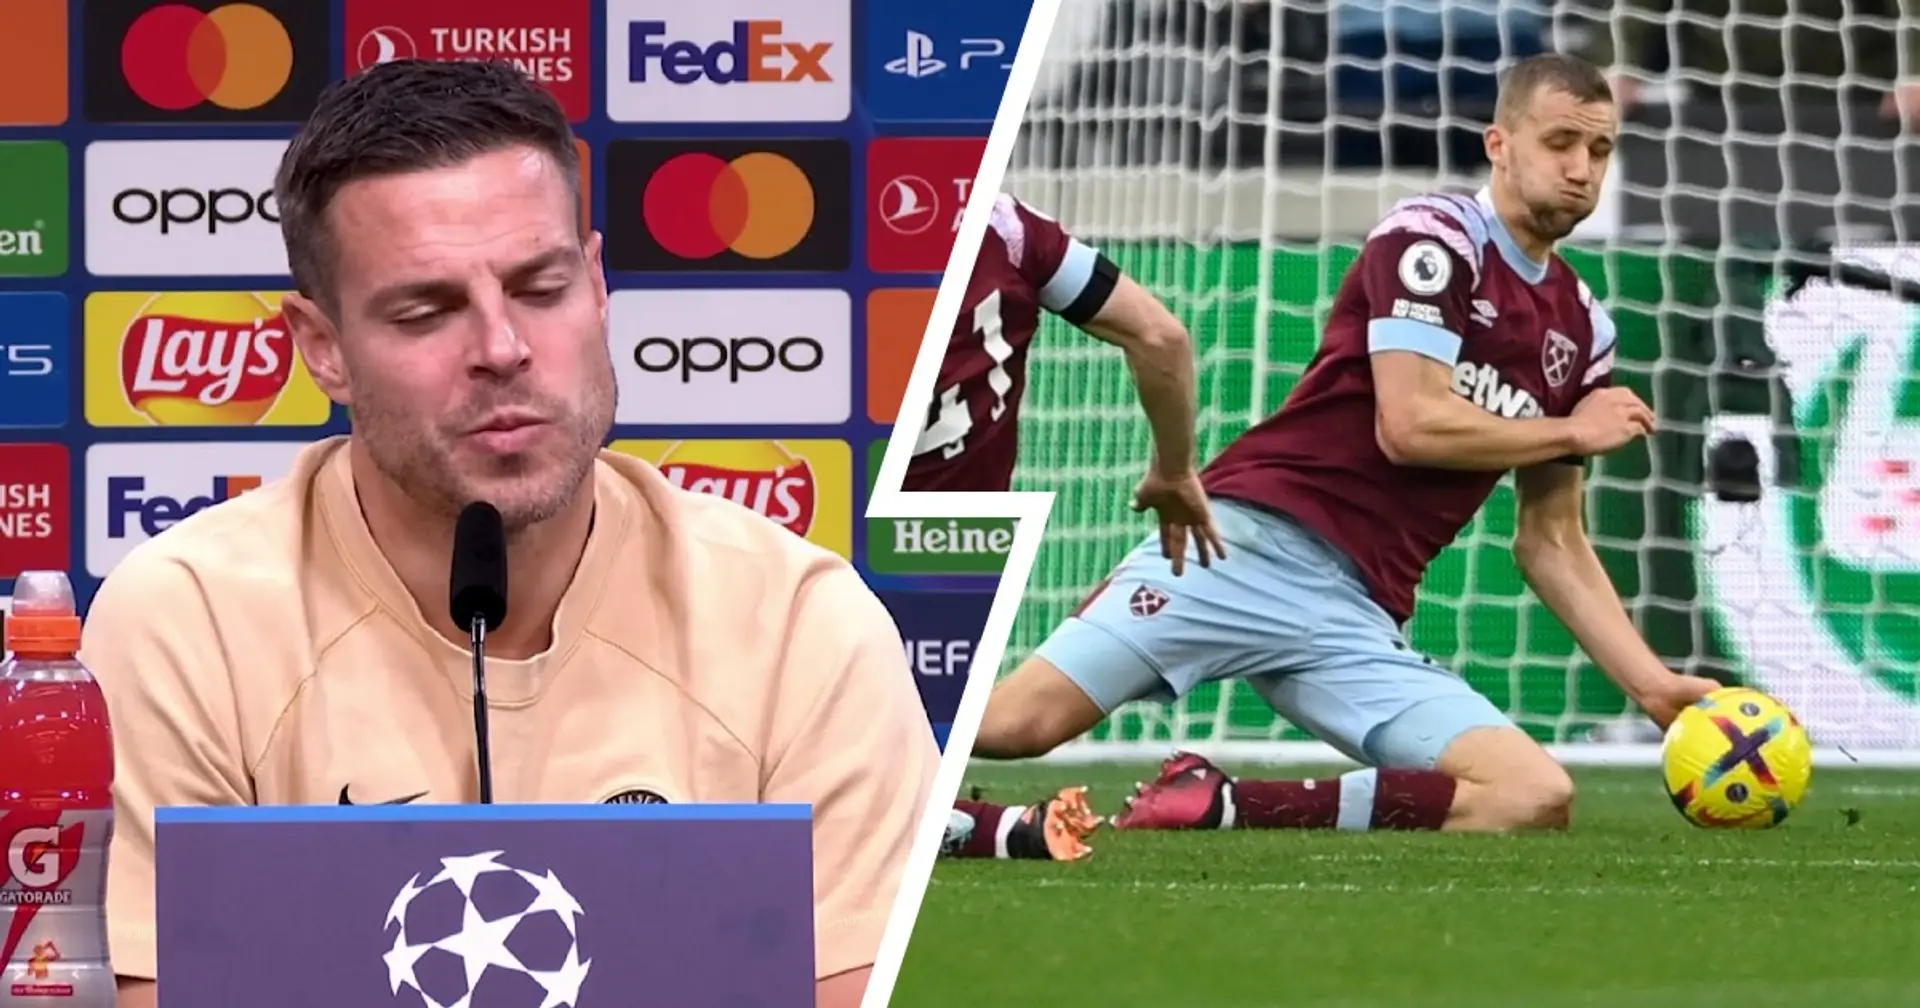 'I was angry, it was unfair to us': Azpilicueta opens up on not being awarded penalty vs West Ham